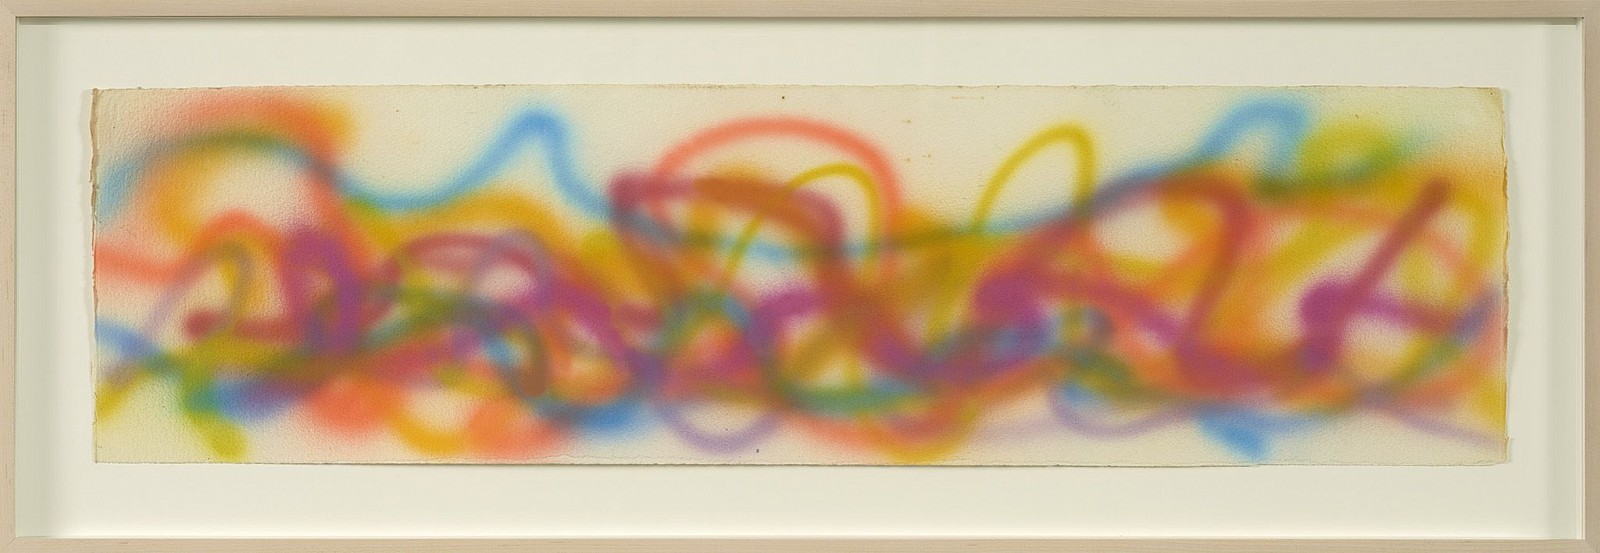 Dan Christensen, Untitled | SOLD, 1968
Acrylic on Arches paper, 11 1/2 x 41 1/2 in. (29.2 x 105.4 cm)
CHR-00287